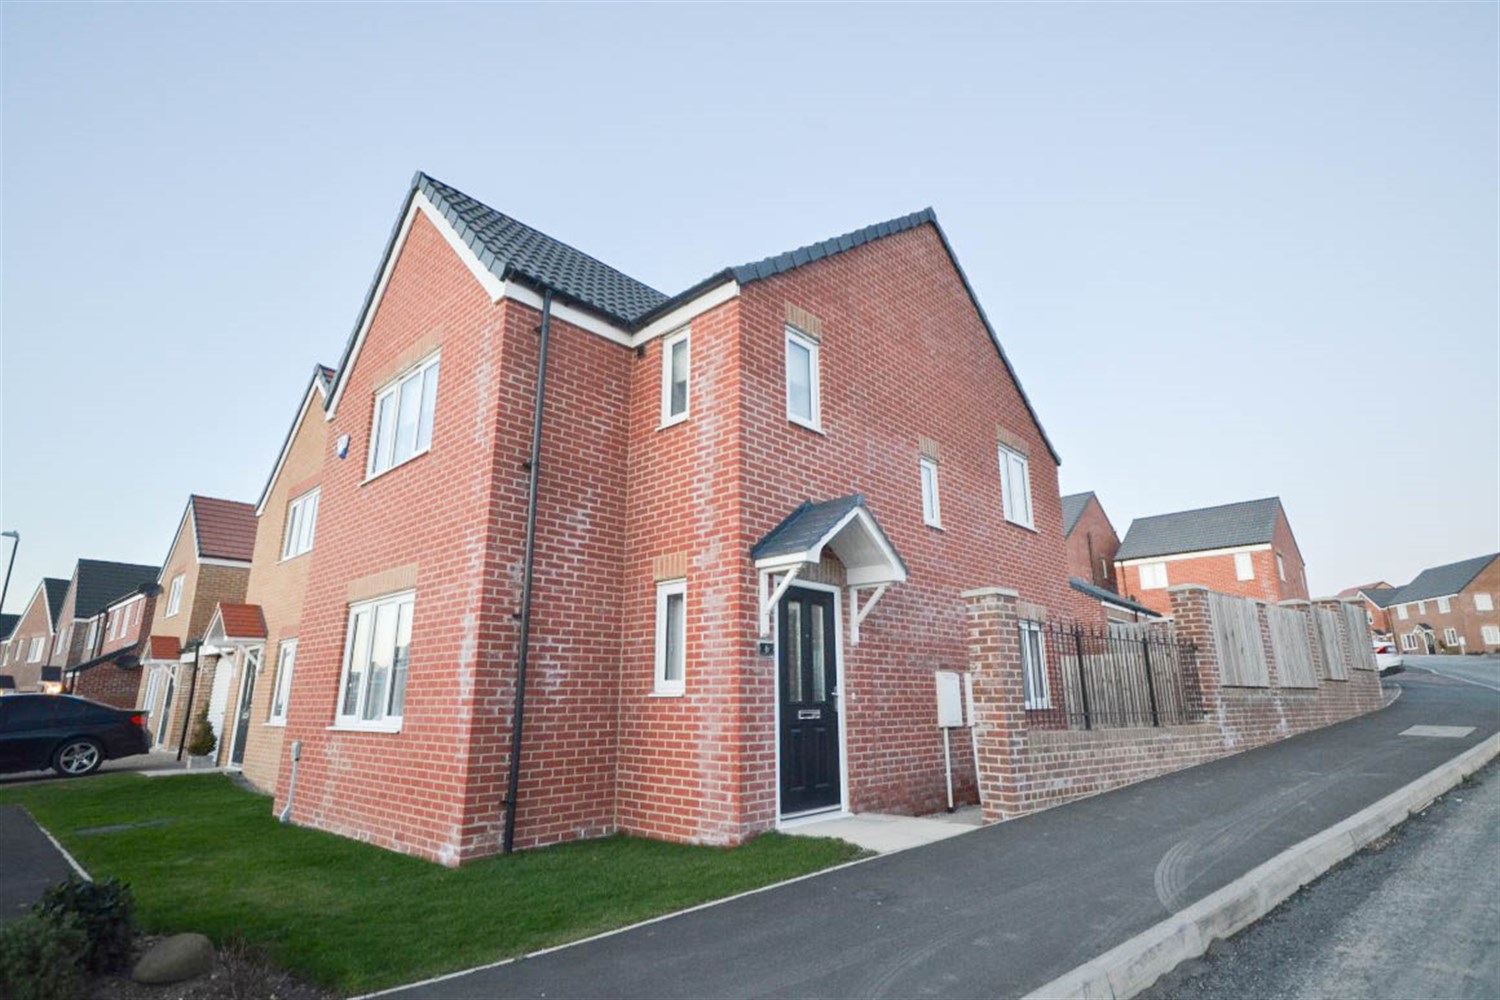 3 bed detached house for sale in Baneberry Drive, Sunderland - Property Image 1